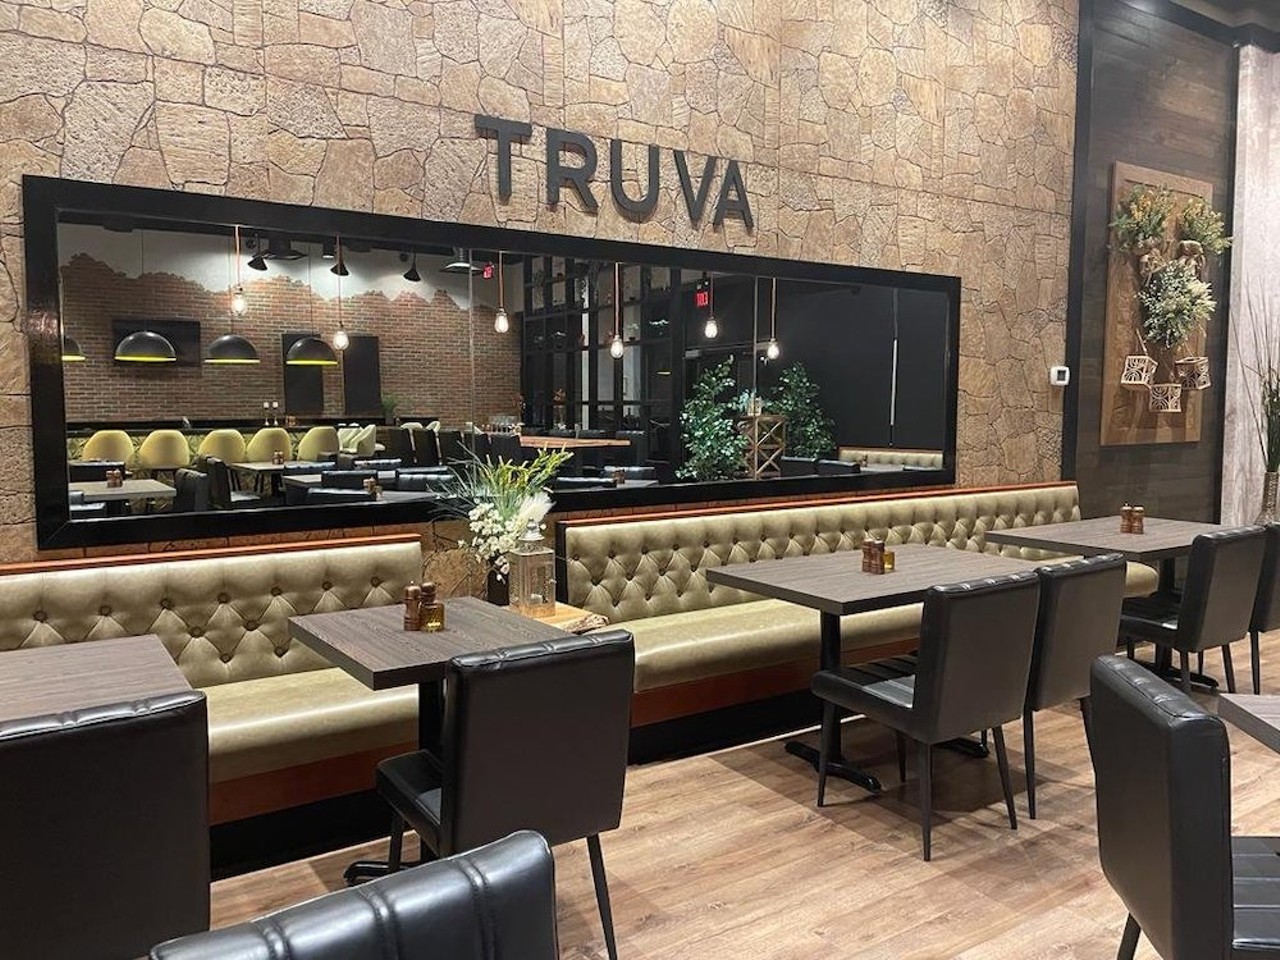 Truva Turkish Kitchen
8060 Montgomery Road, Suite 400, Kenwood
Truva is already a CityBeat notable and it deserves additional props for its elegance, service and superb cuisine in a strip mall. It boasts generous portion sizes, exquisite presentation and the best fresh pita. (Anne Arenstein)